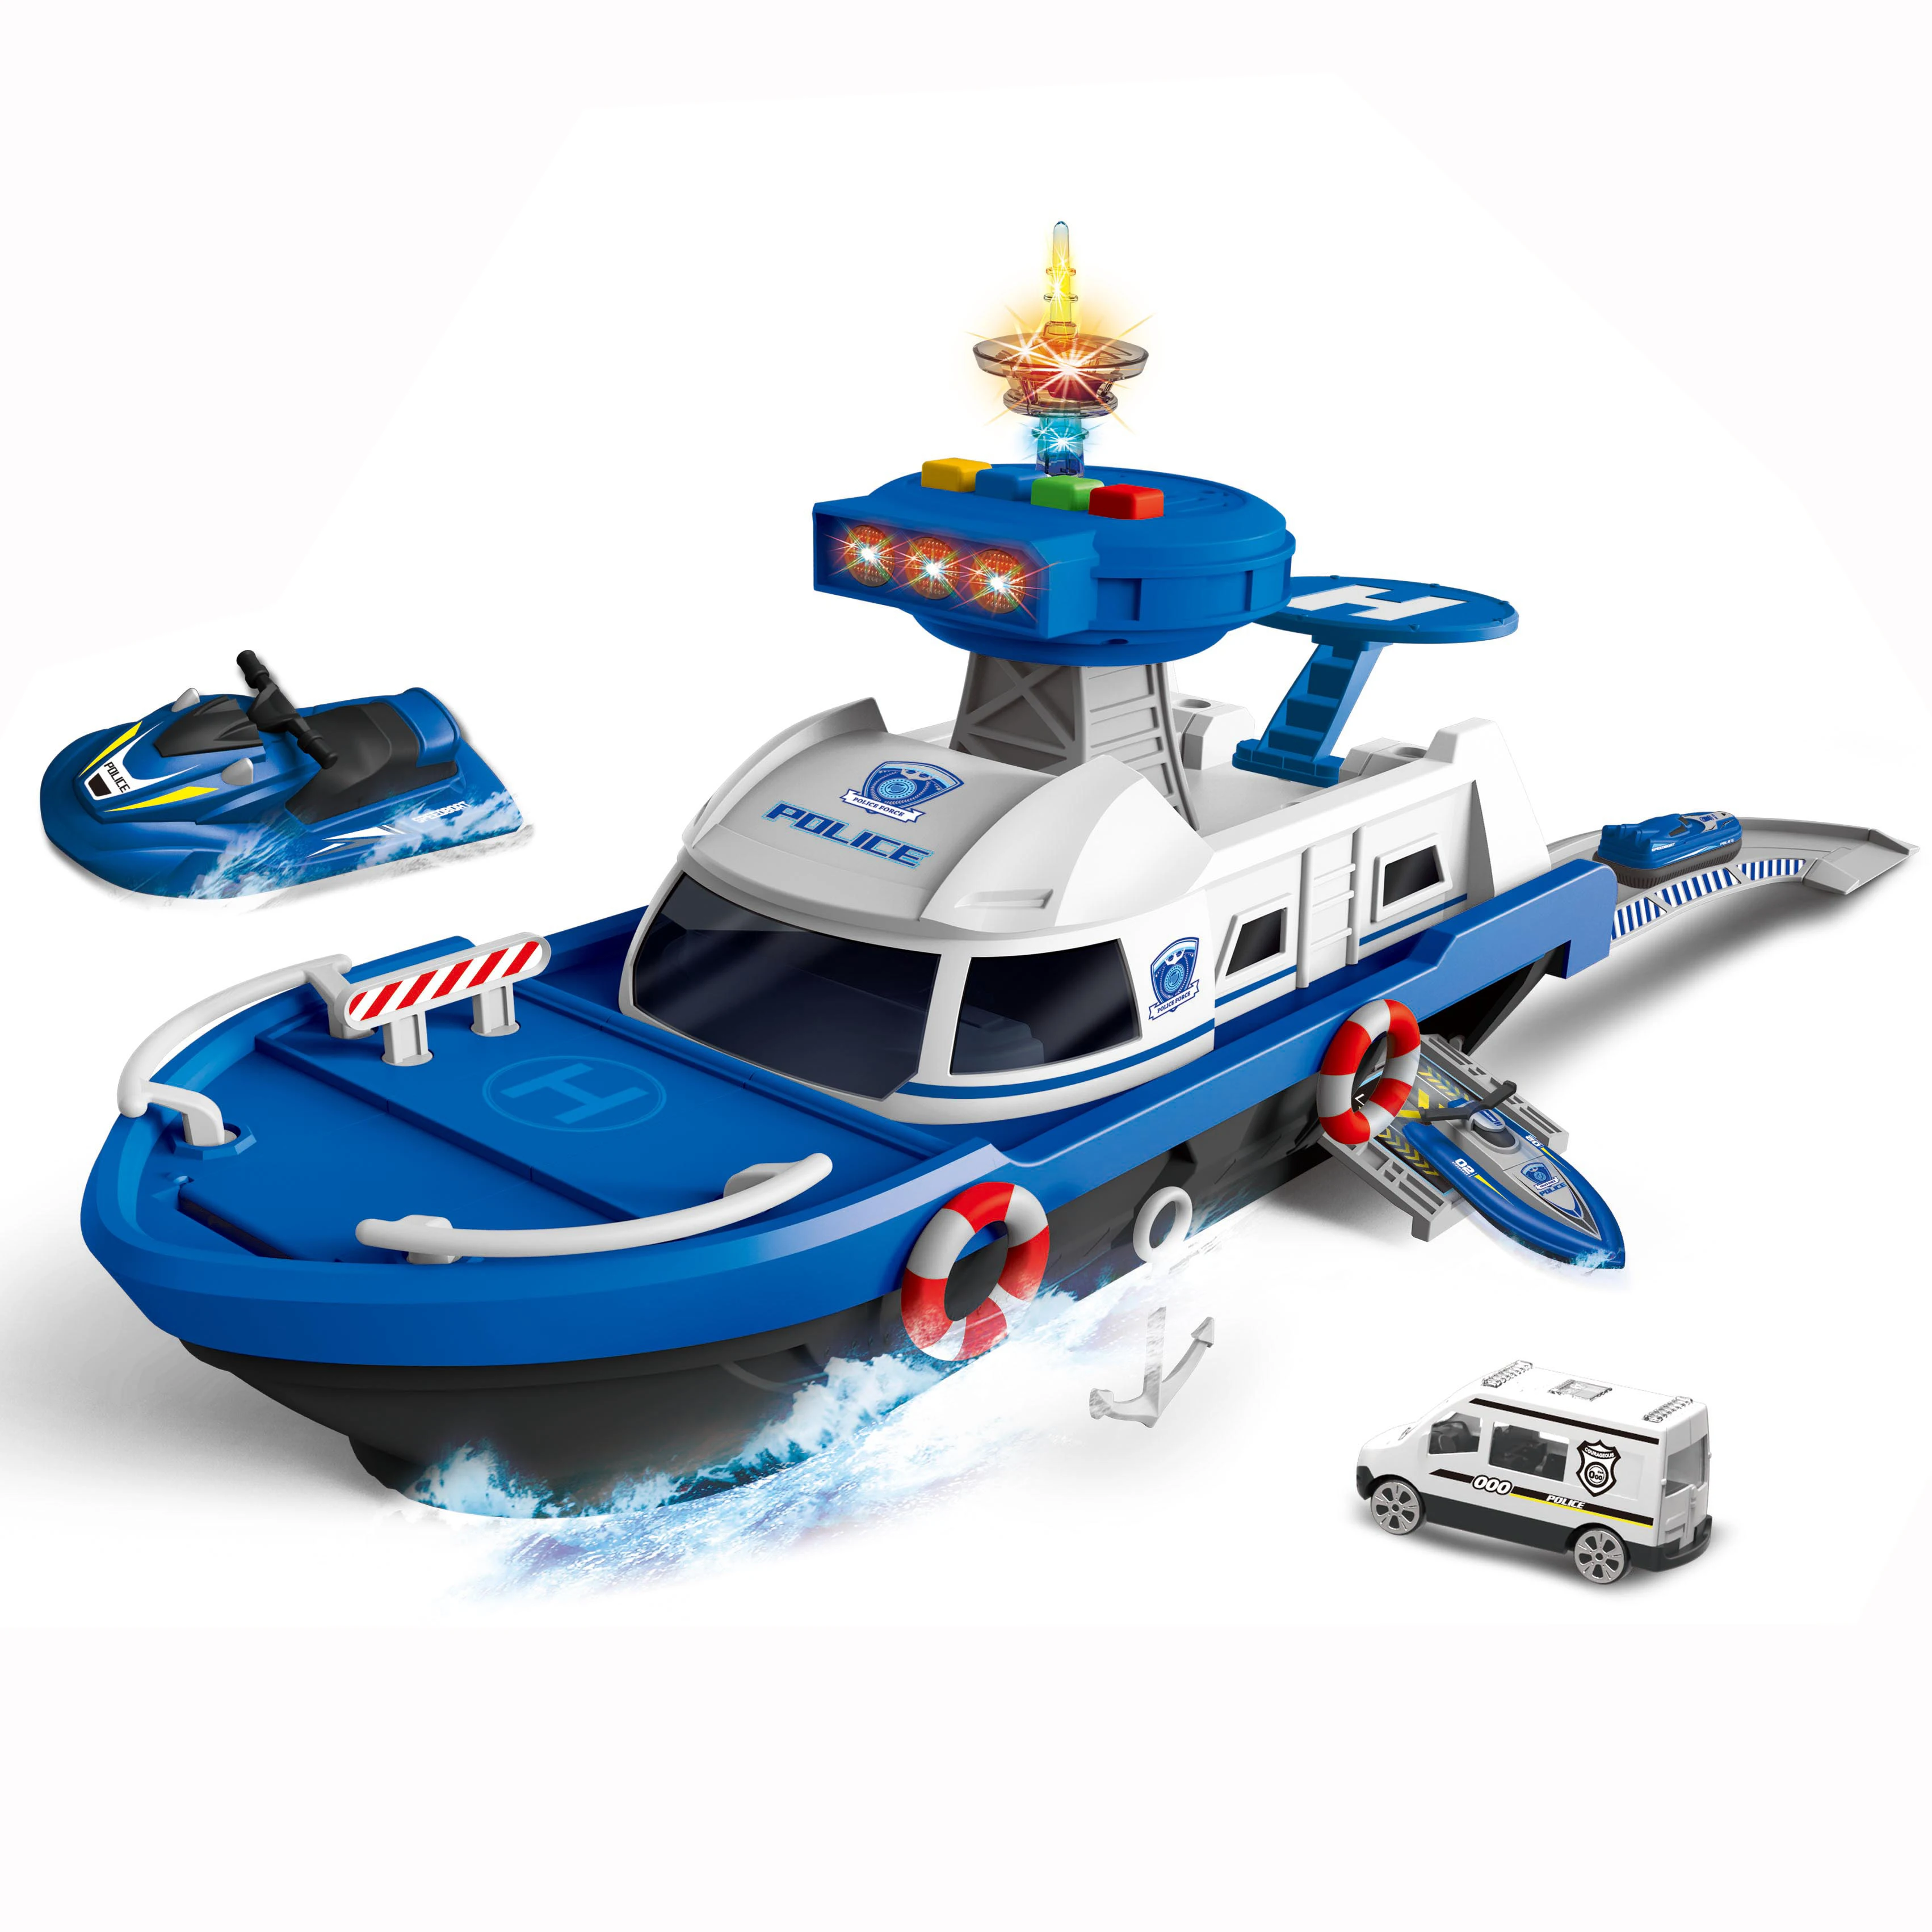 Kids Cartoon Light Music Toy Role Play Police Electric Boat 1:64 Alloy  Slide Ship - Buy Kids Cartoon Light Music Toy,Role Play Police Electric Boat,Alloy  Slide Ship Product on 